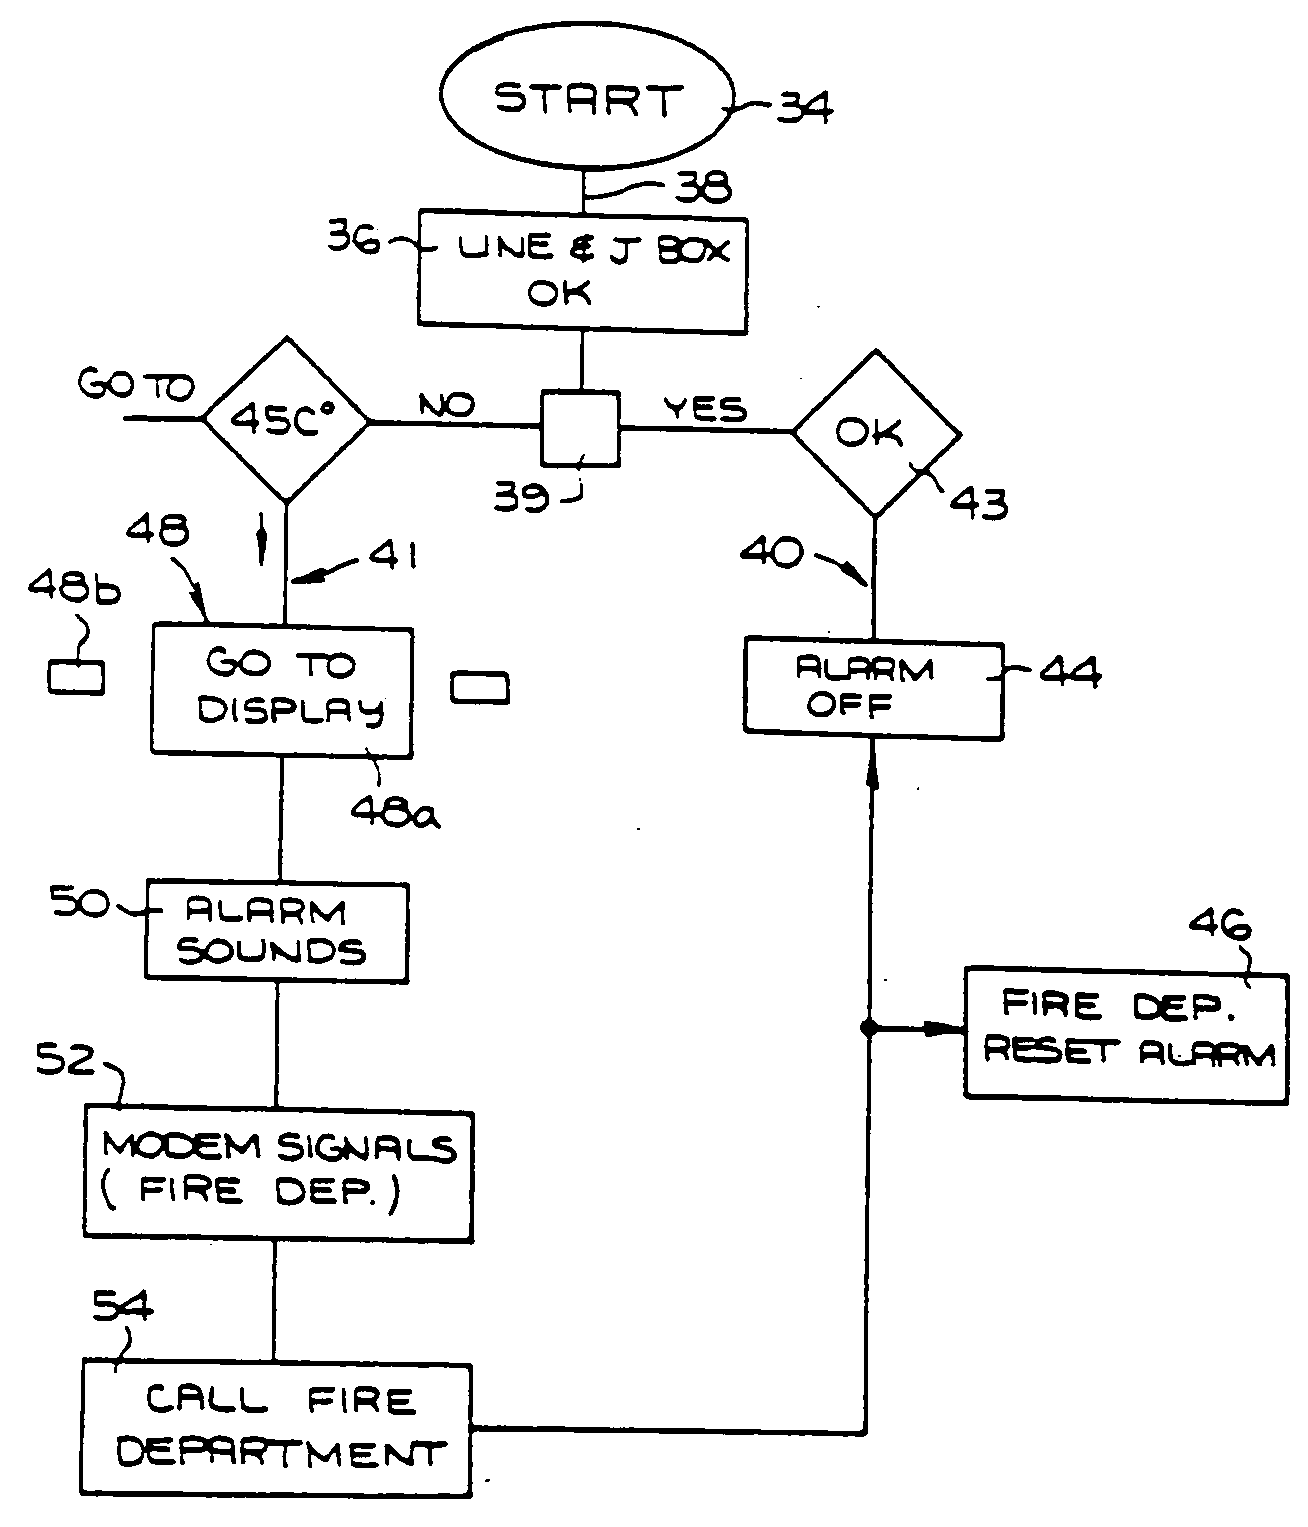 Alarm system for detecting excess temperature in electrical wiring